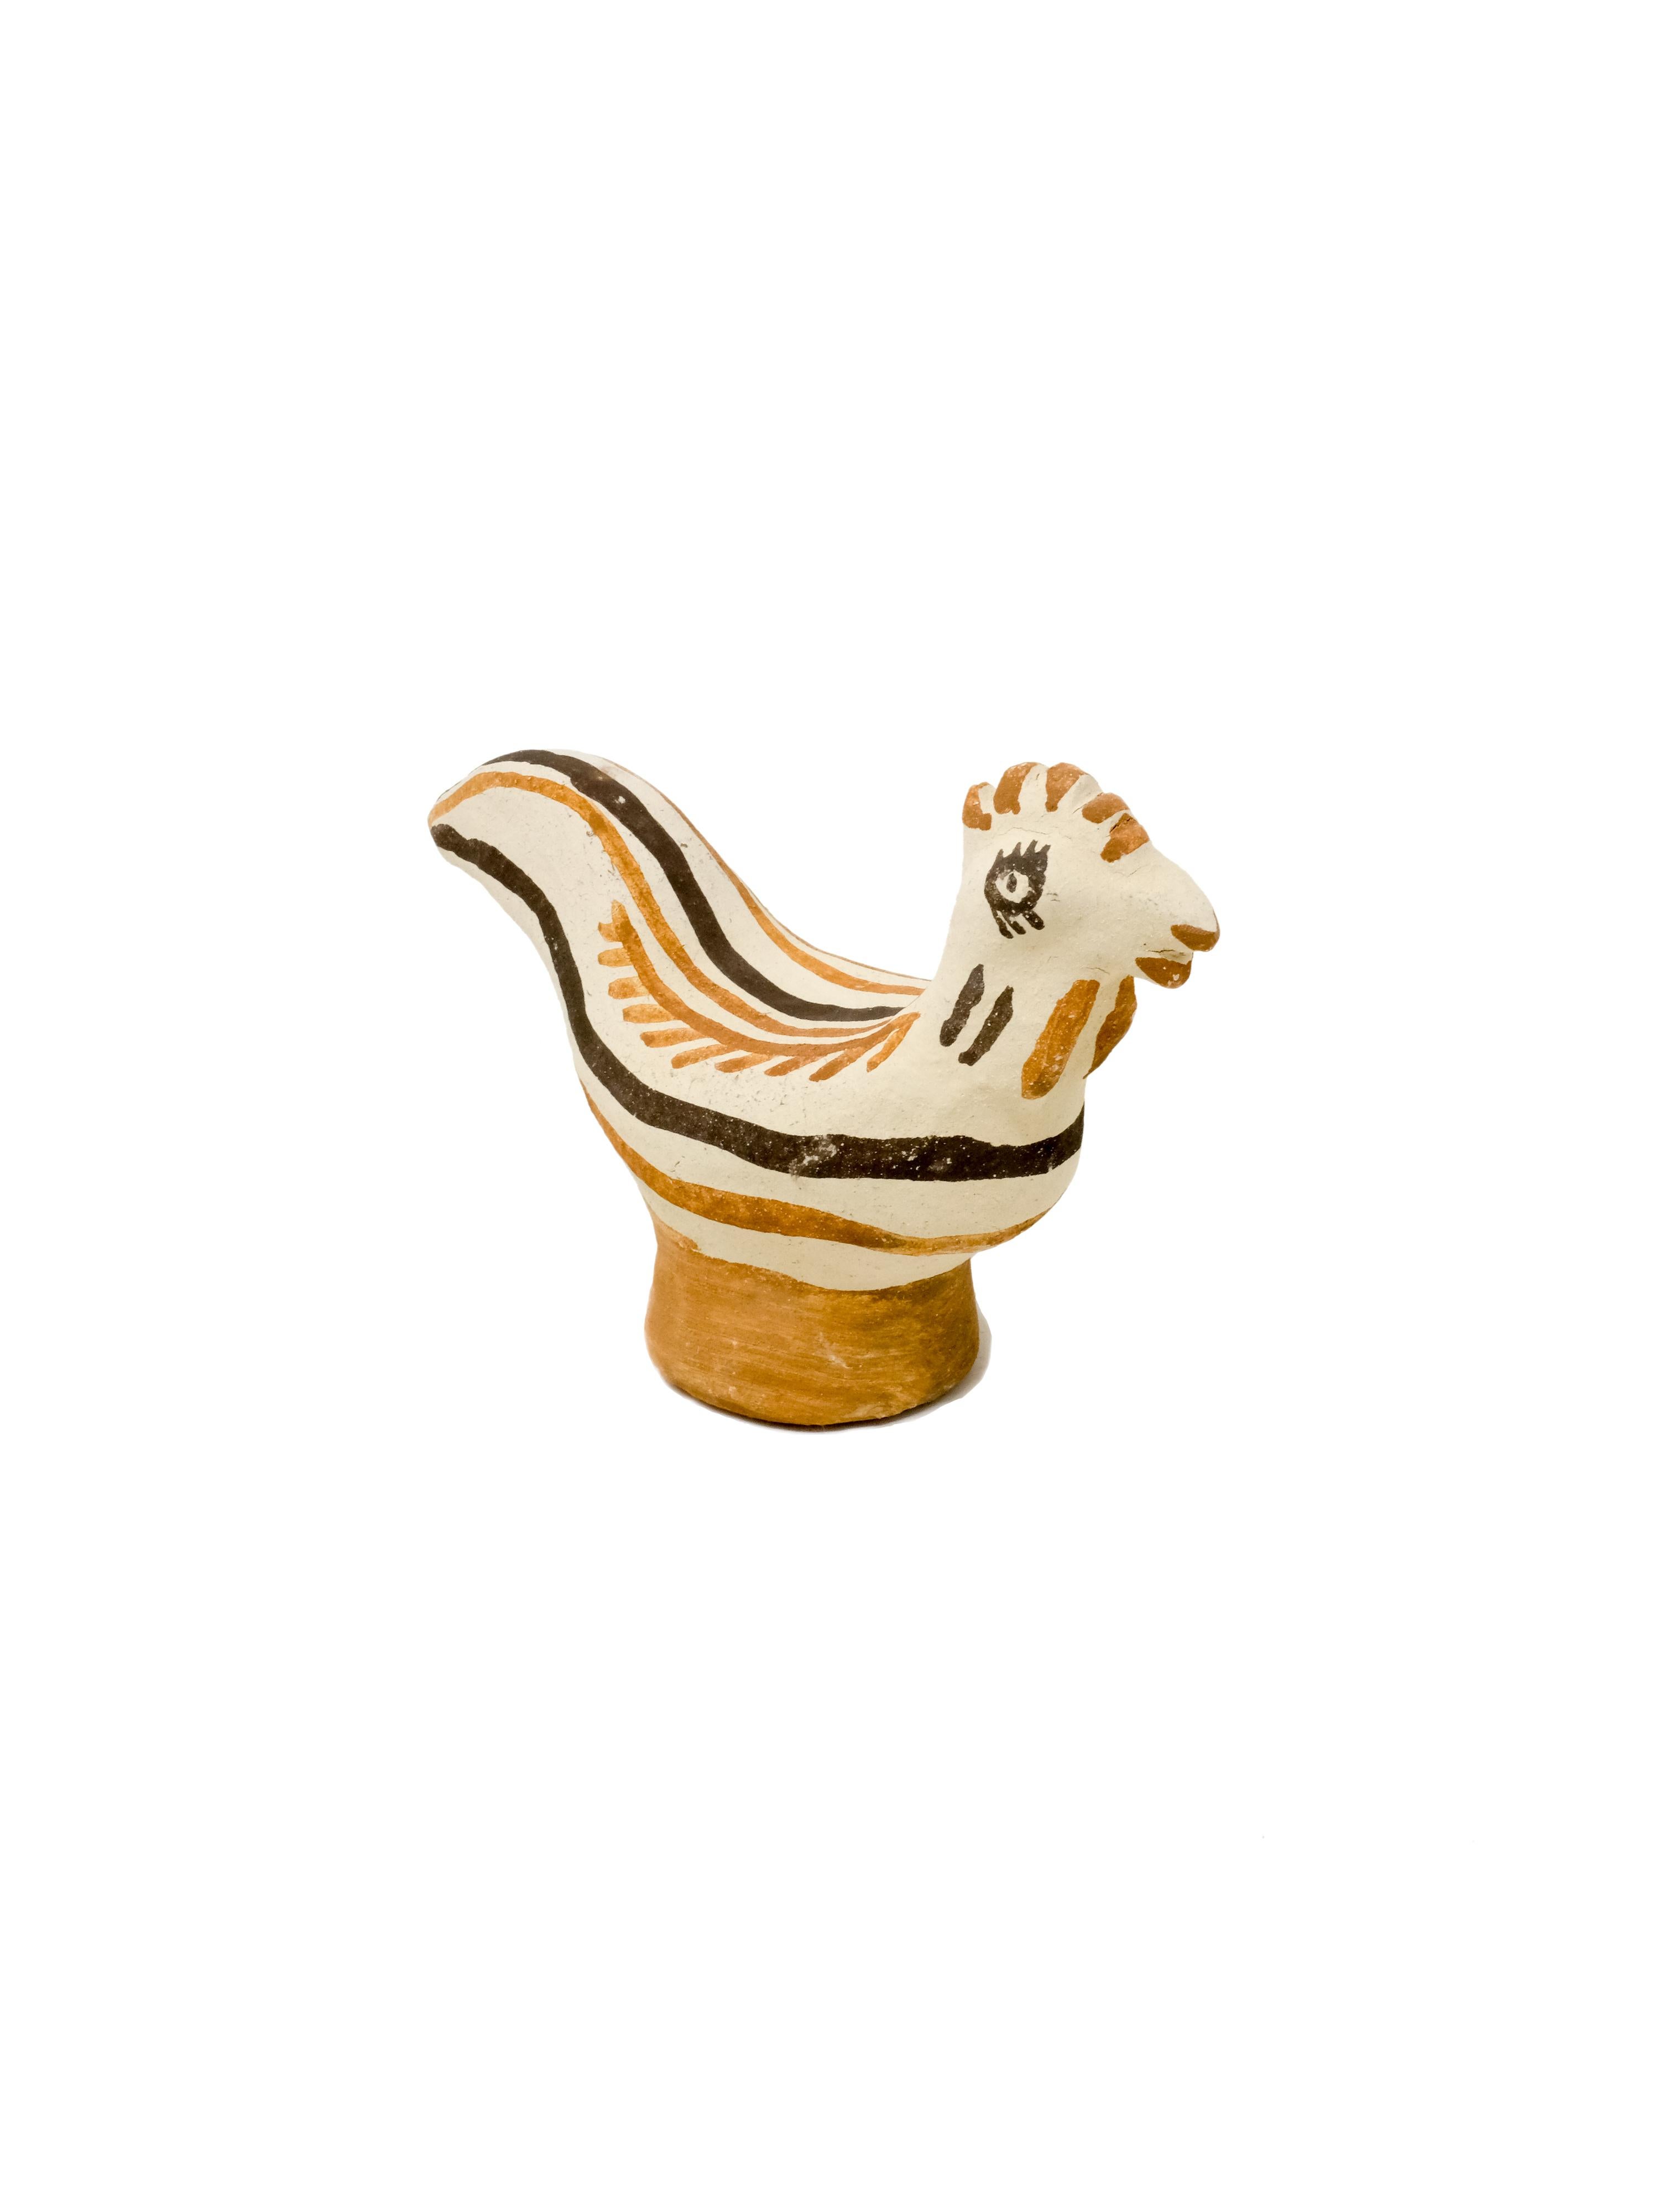 - Hand built decorative hen sculpture
- made of clay collected from the potter's surroundings.
- decorative motifs painted with a goat hair brush made by the potter to apply natural pigments.
- made in the Moroccan Rif mountains by